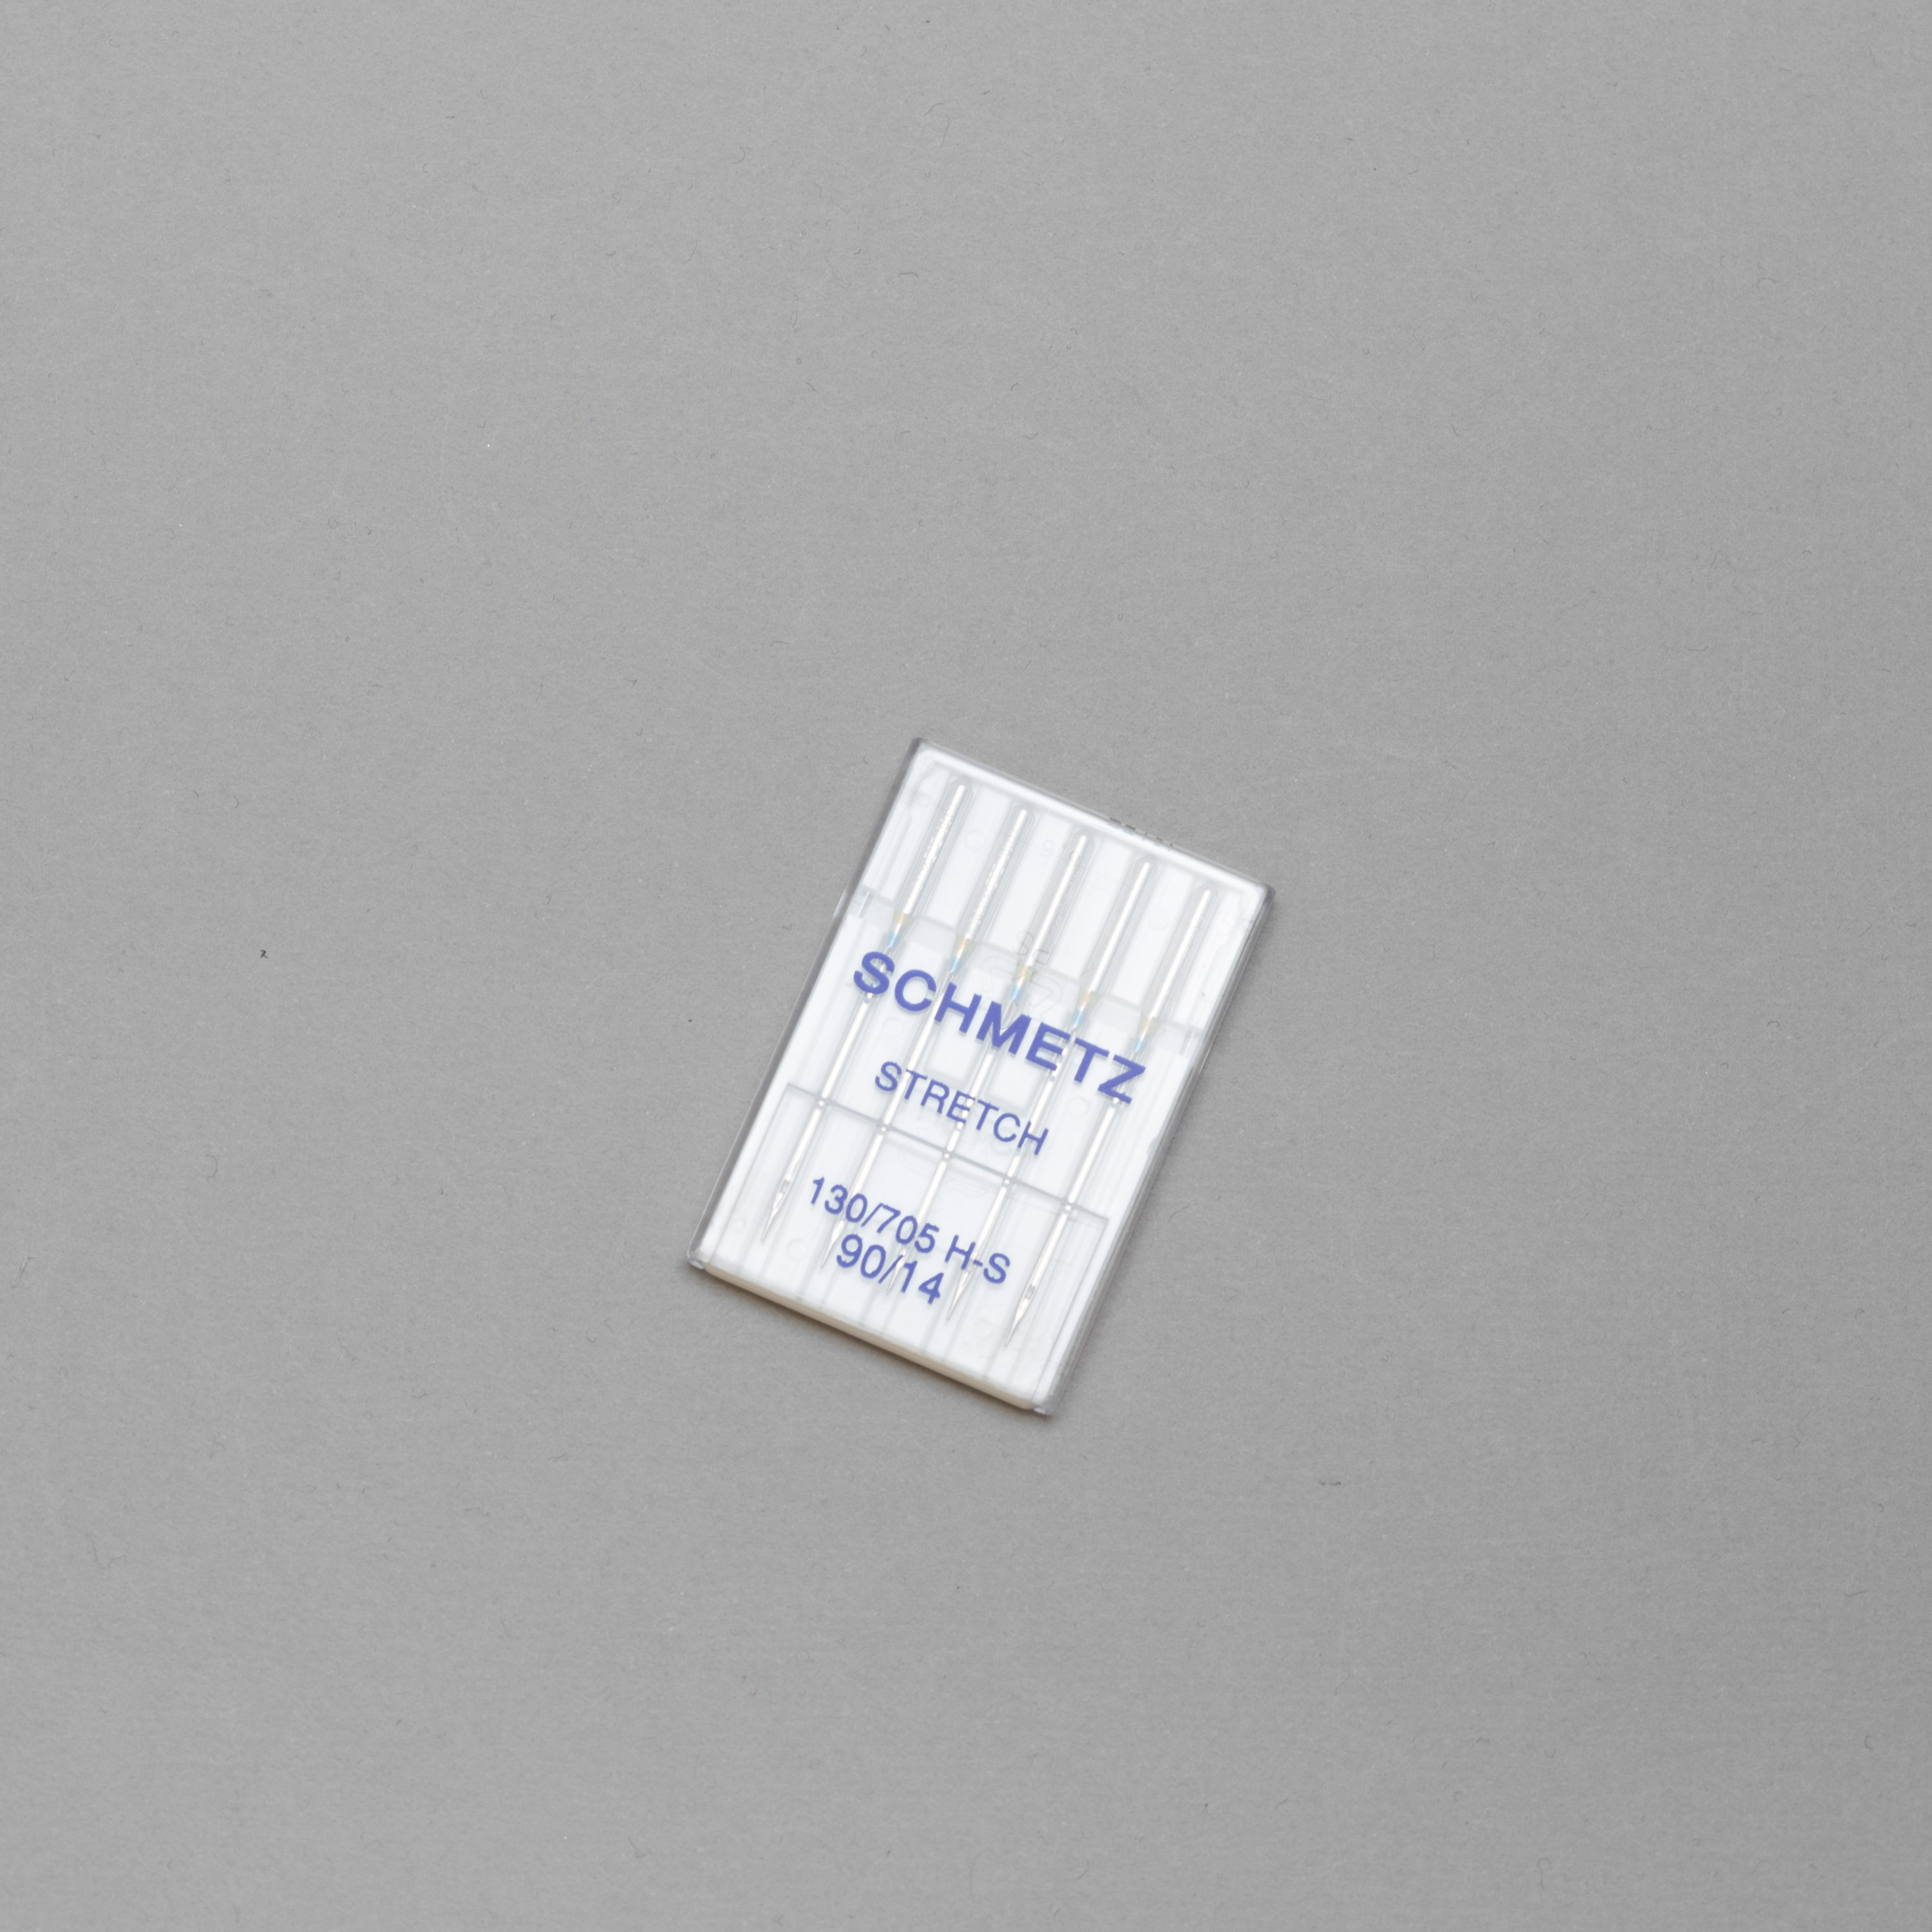 schmetz stretch sewing machine needles NS-1000 7511 from Bra-Makers Supply